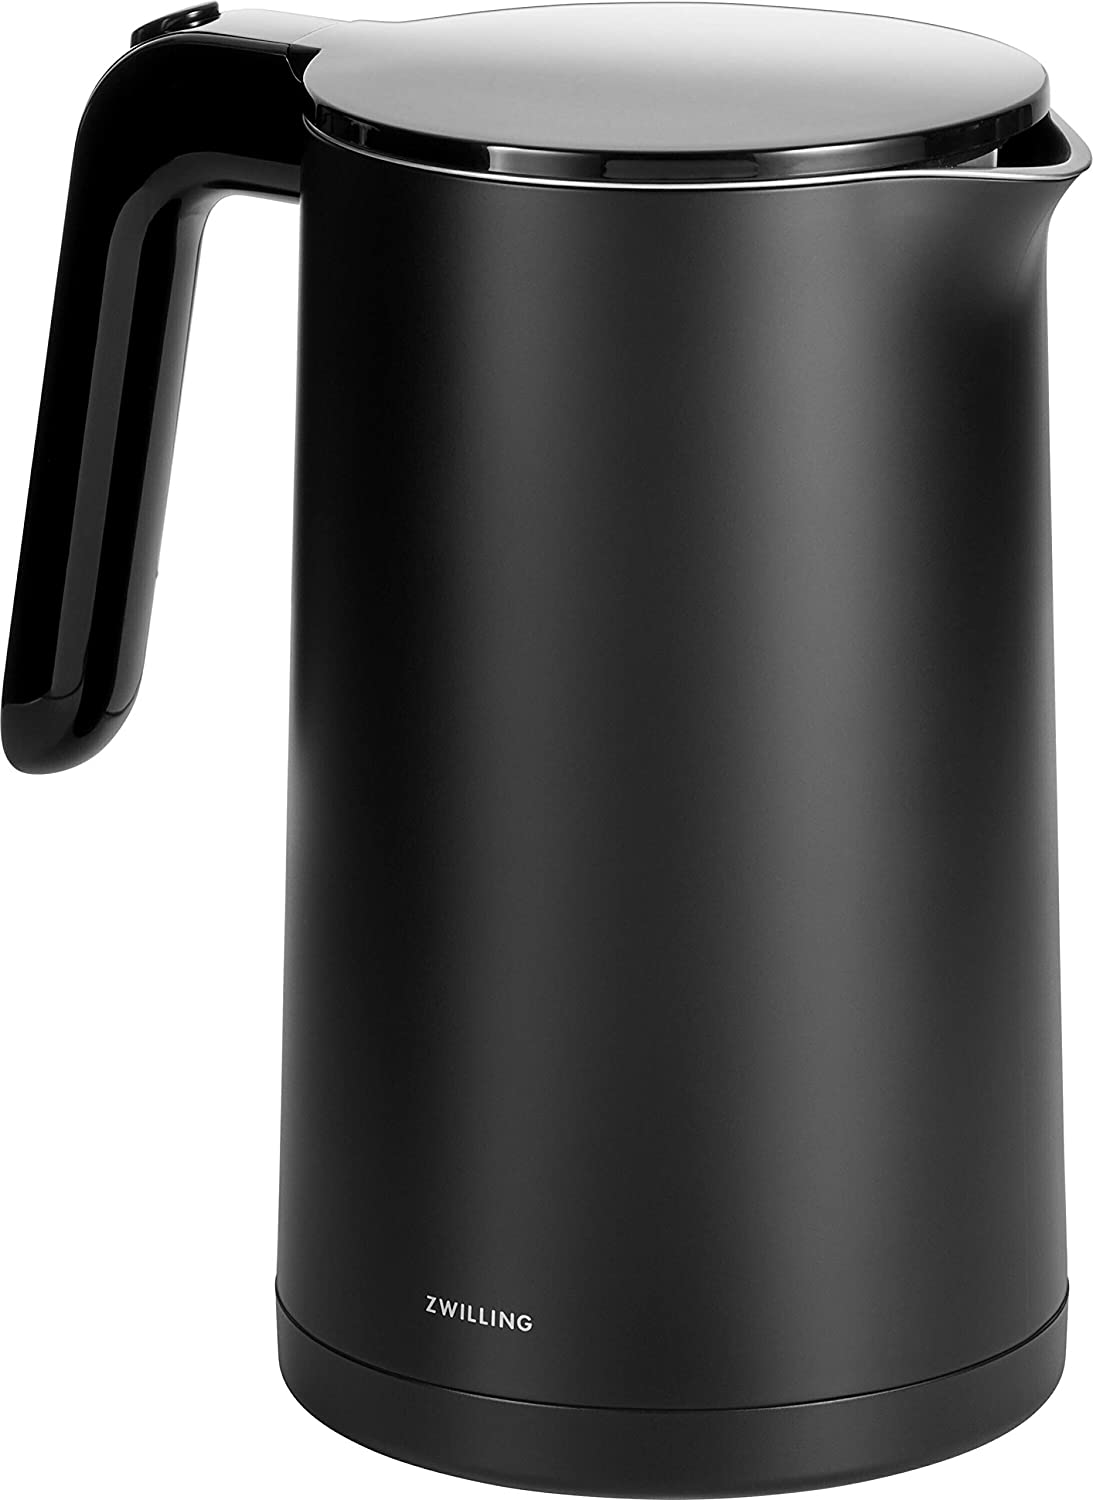 Zwilling Enfinigy Electric Kettle 1.5 l, Black